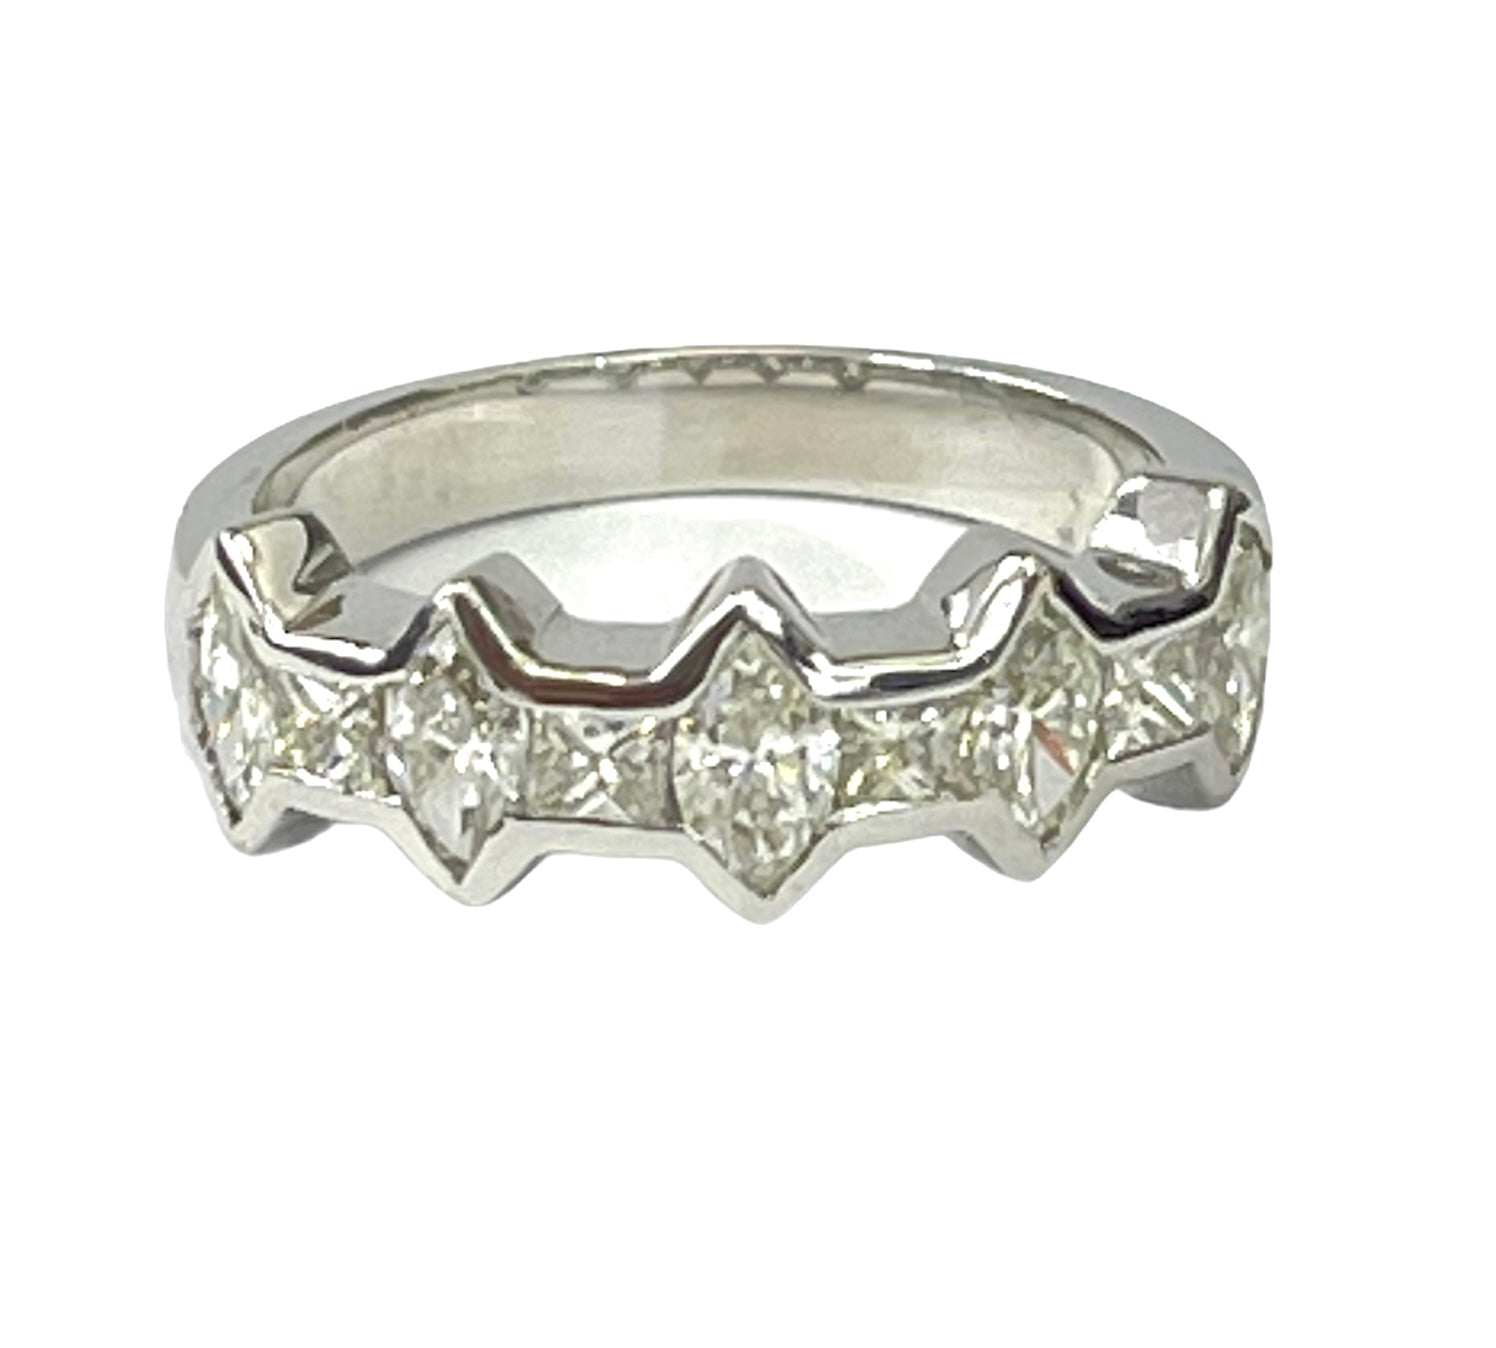 Marquise and Princess Cut Diamond Ring 1.41 Carats White Gold